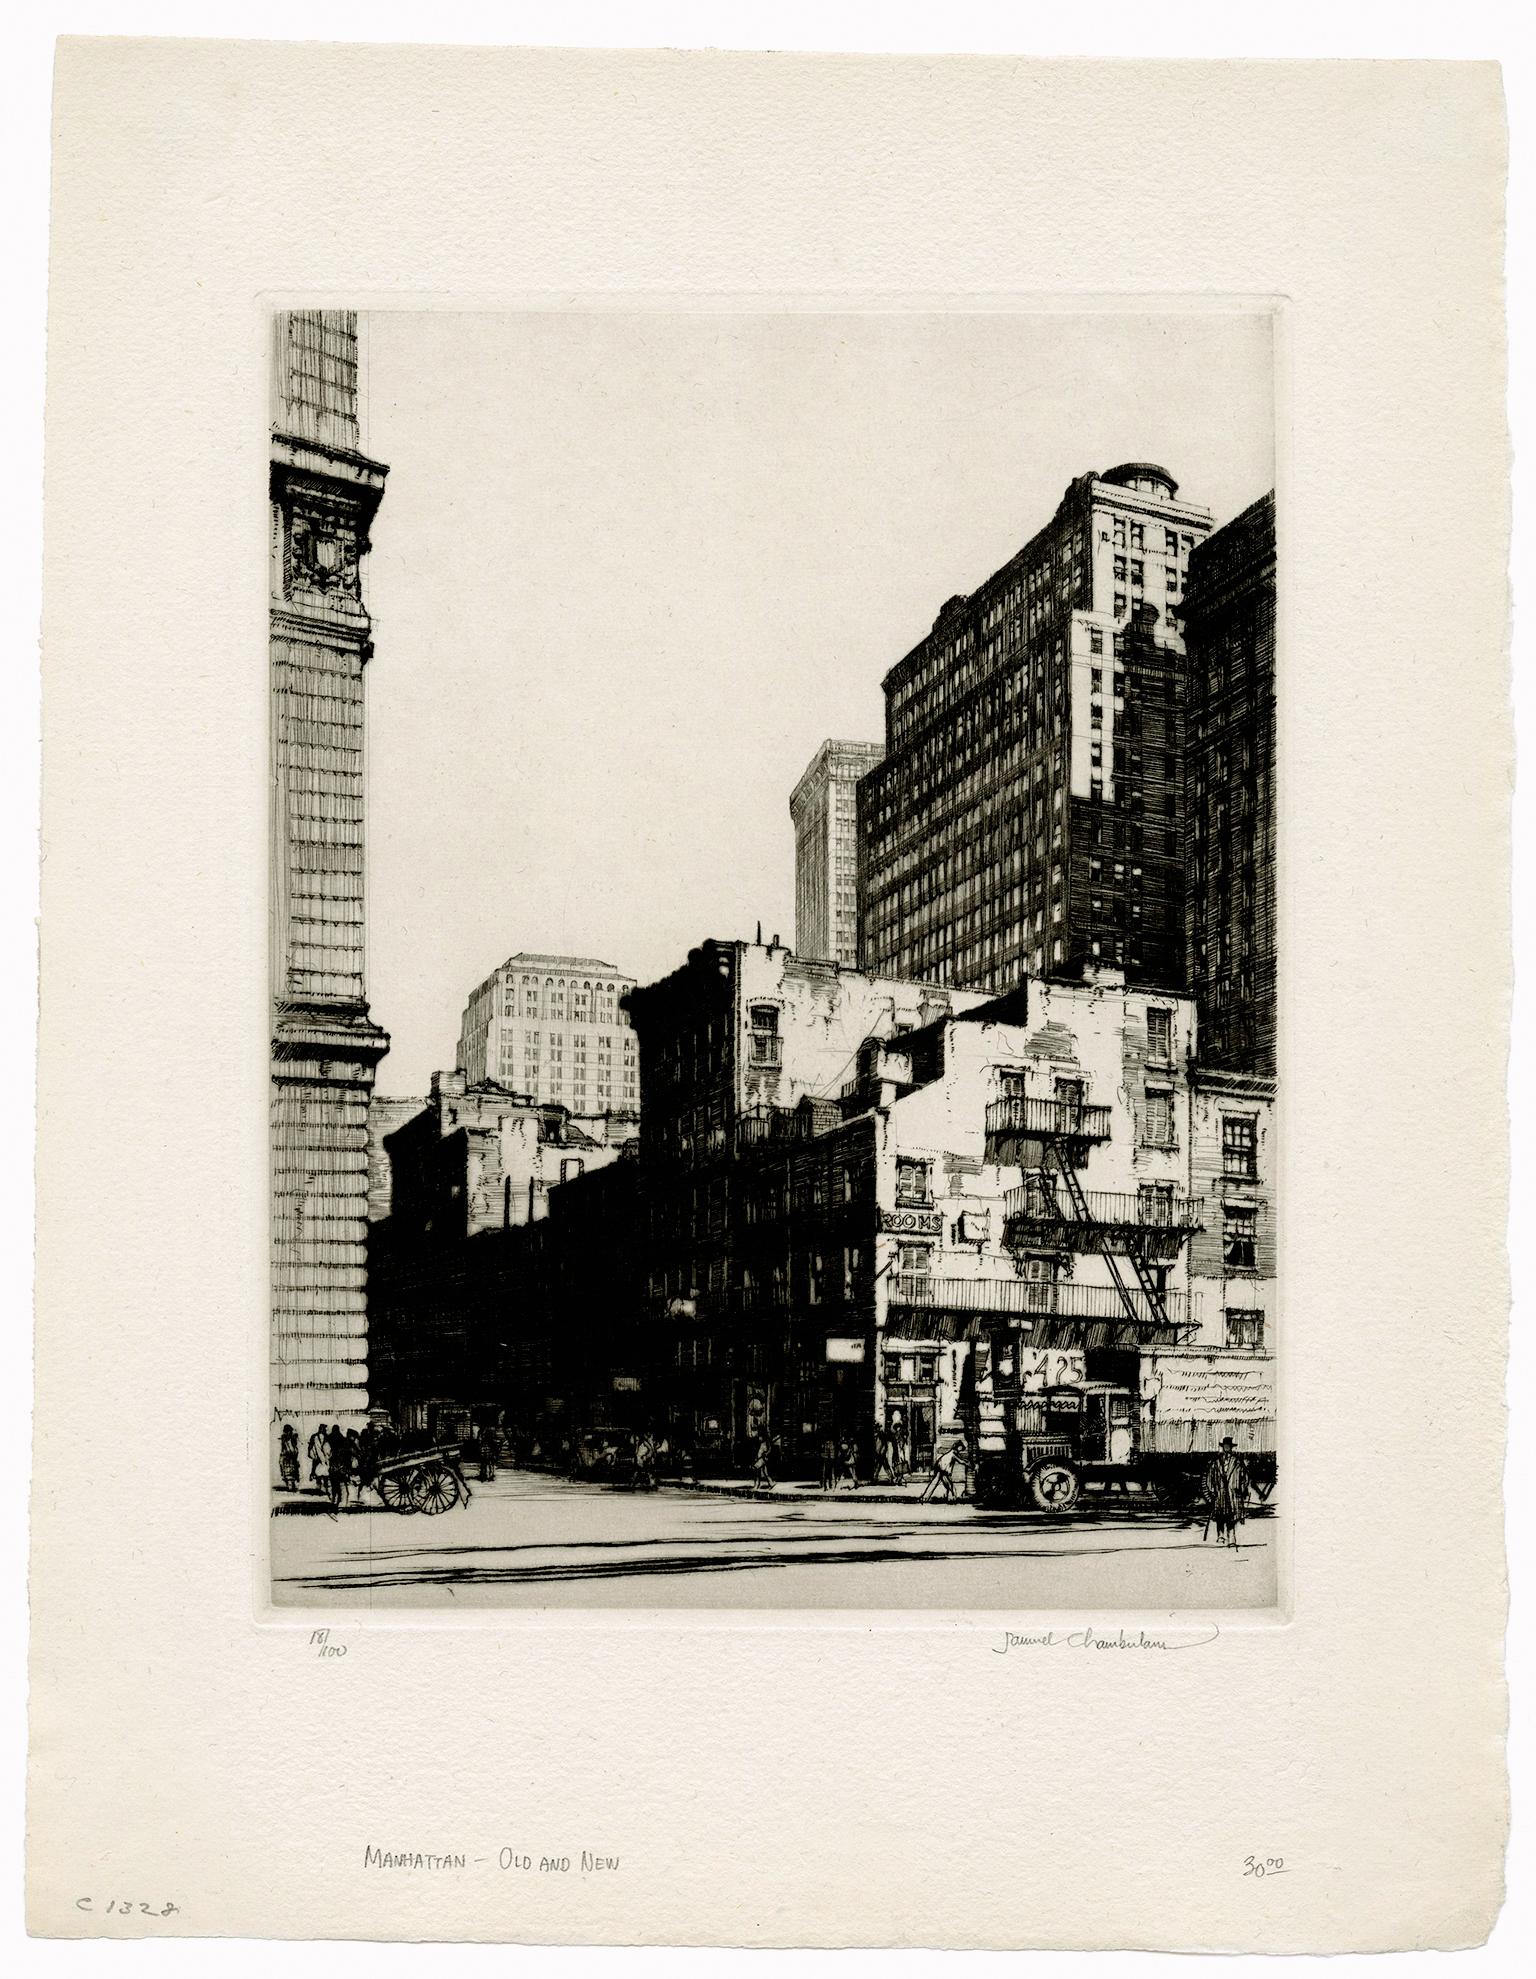 'Manhattan Old and New' —1920s Realism, Cityscape - Print by Samuel Chamberlain